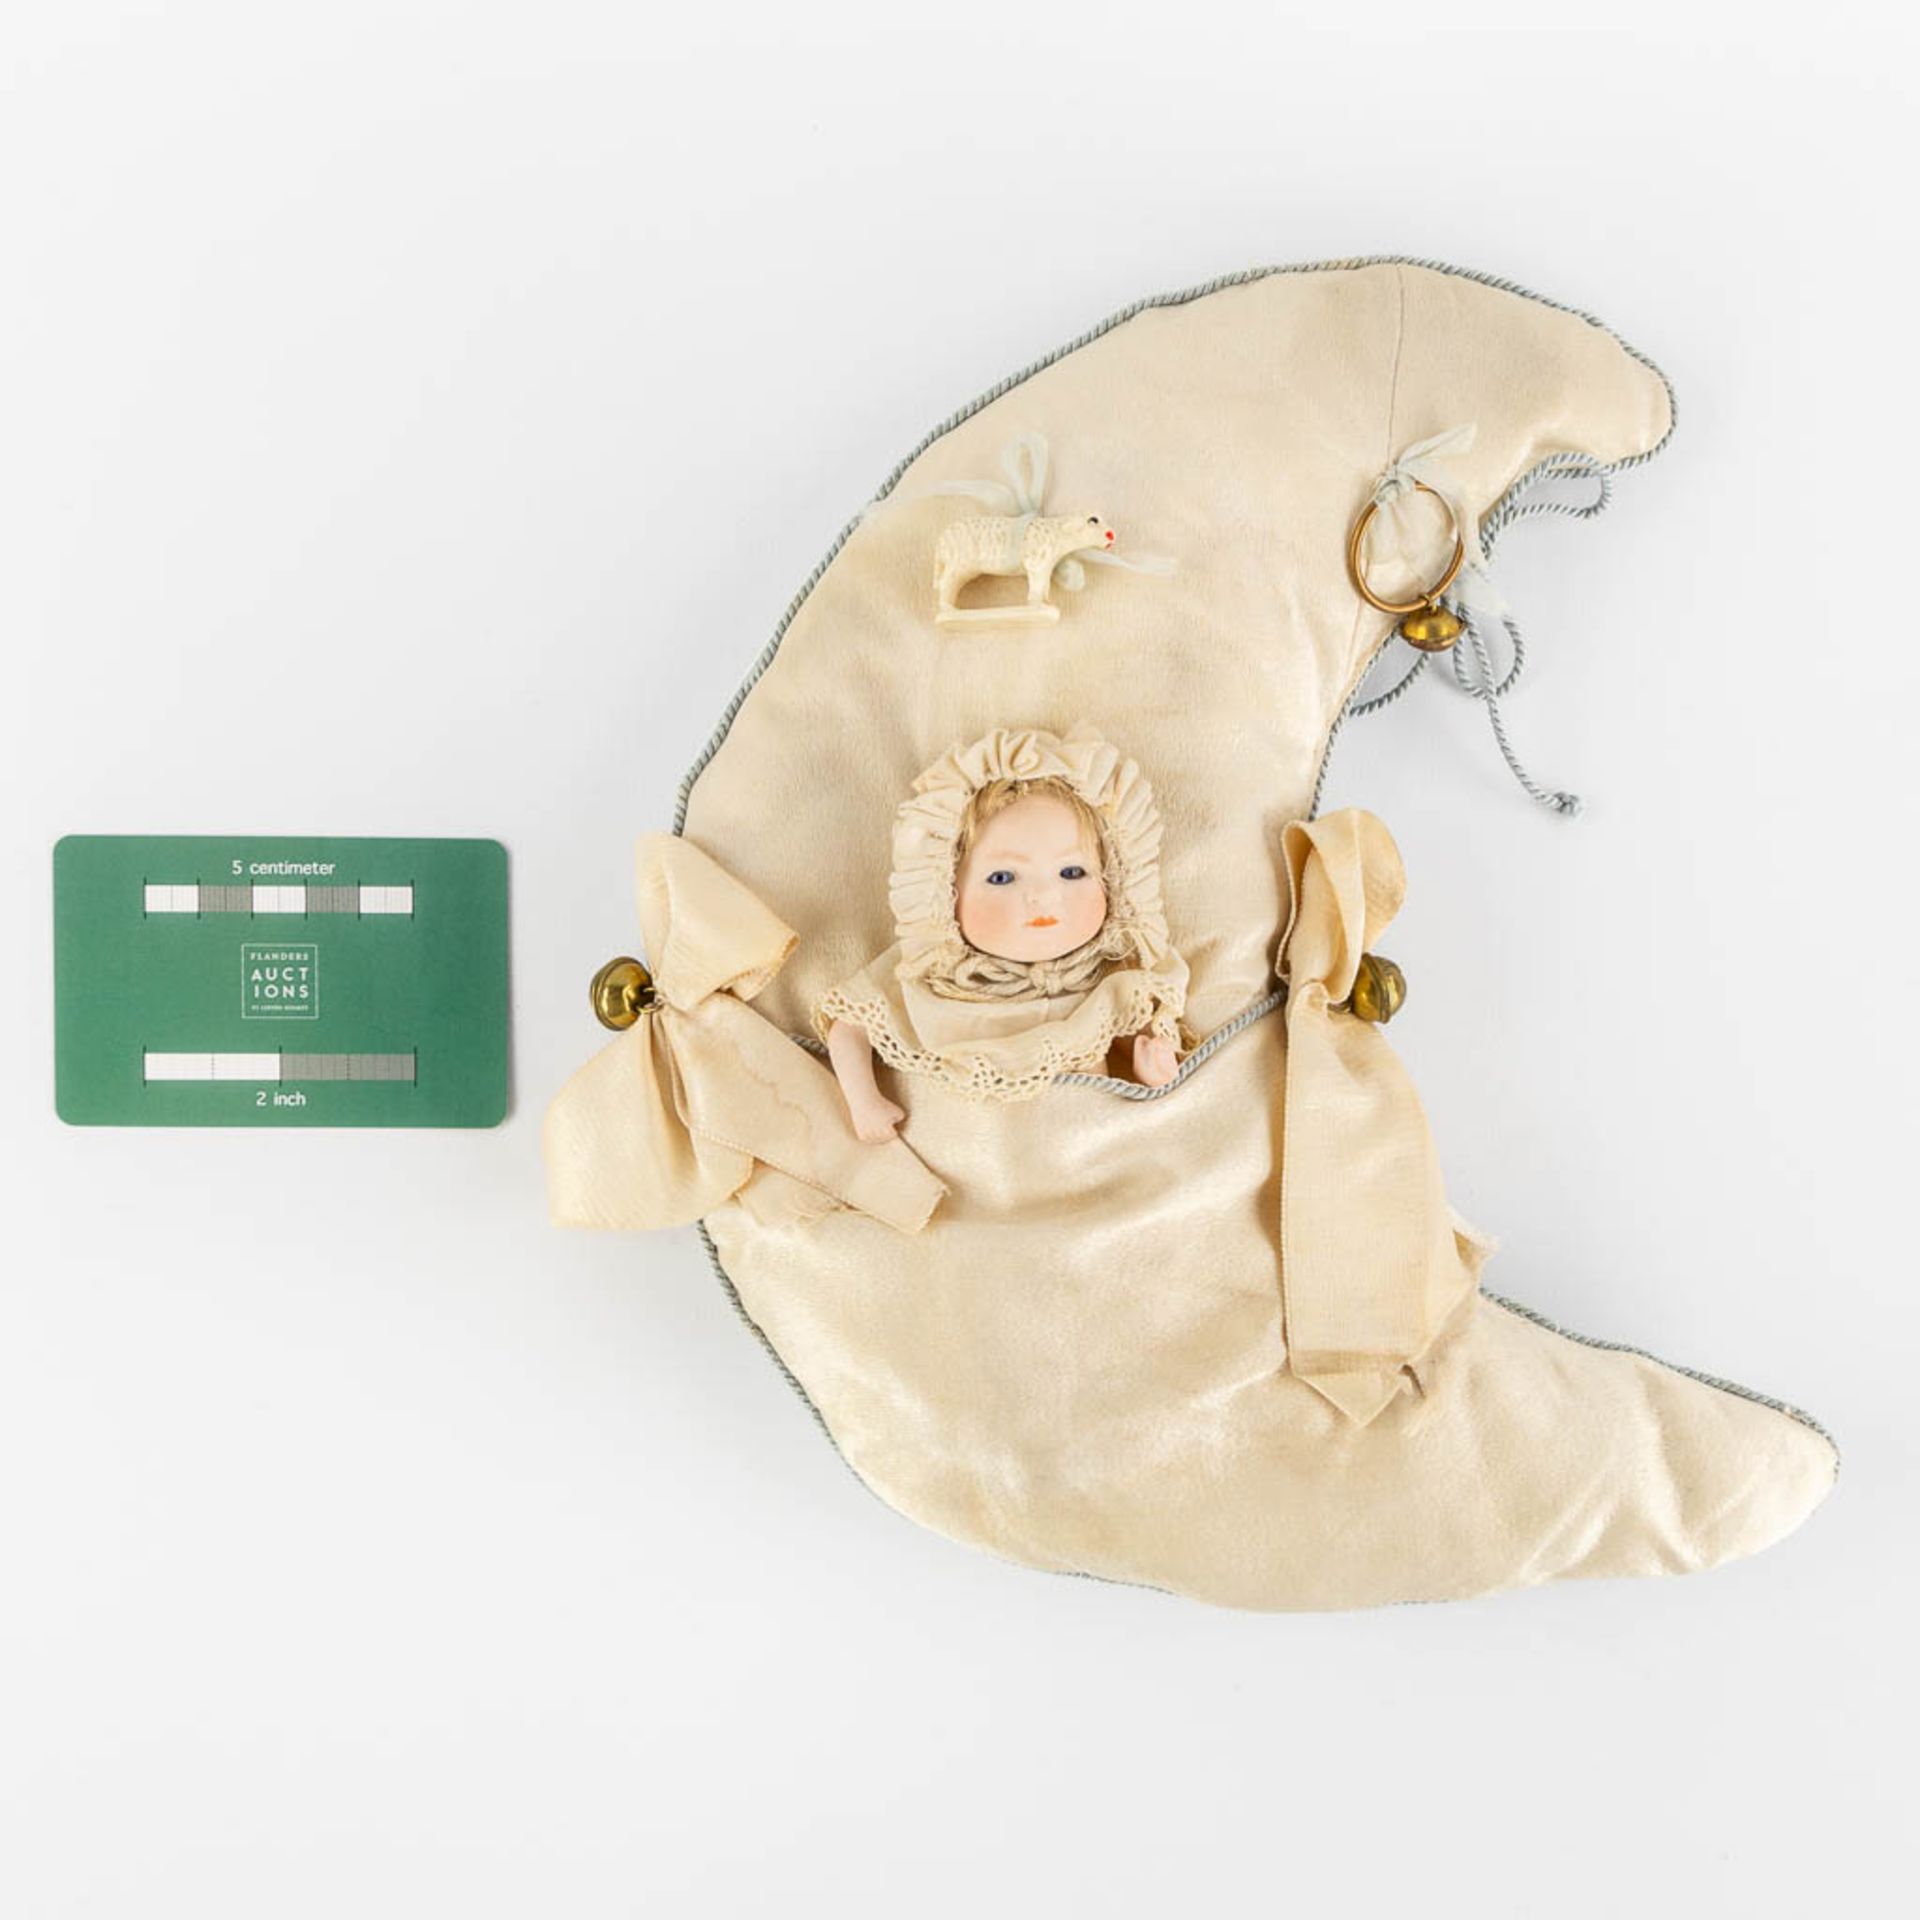 An antique doll in a crescent moon-shaped sleeping bag. Putnam 1922. (W:23 x H:26 cm) - Image 2 of 13